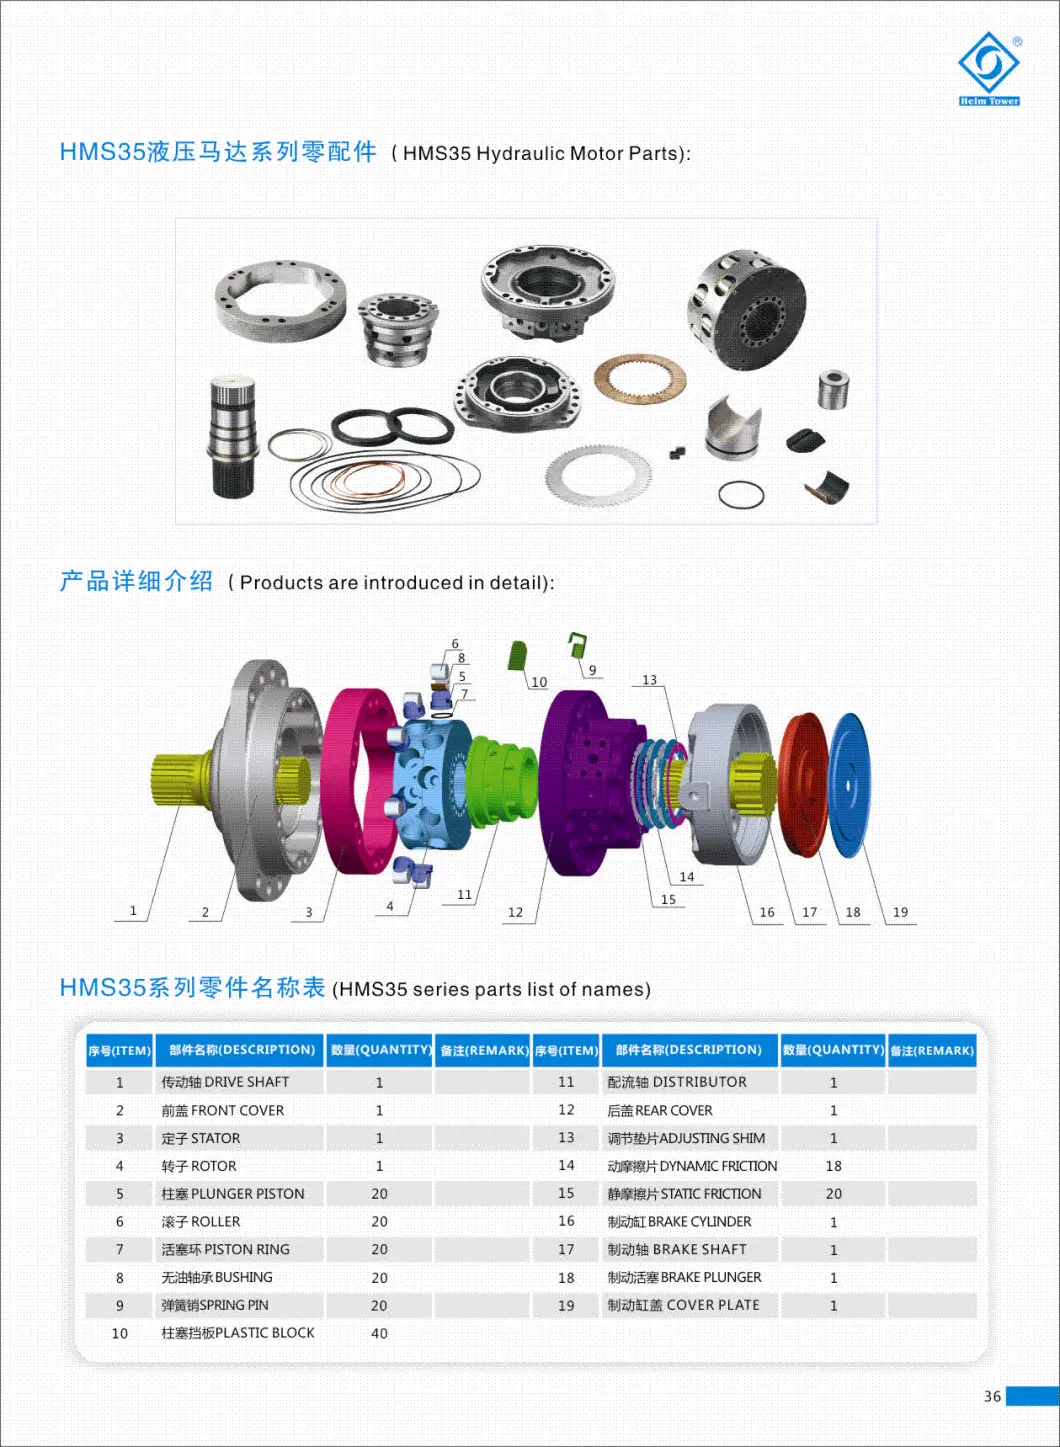 Poclain Ms35 Motor for Concrete Mixing Machine, Drill, Jumbolter, Heavy-Duty Handling Machine